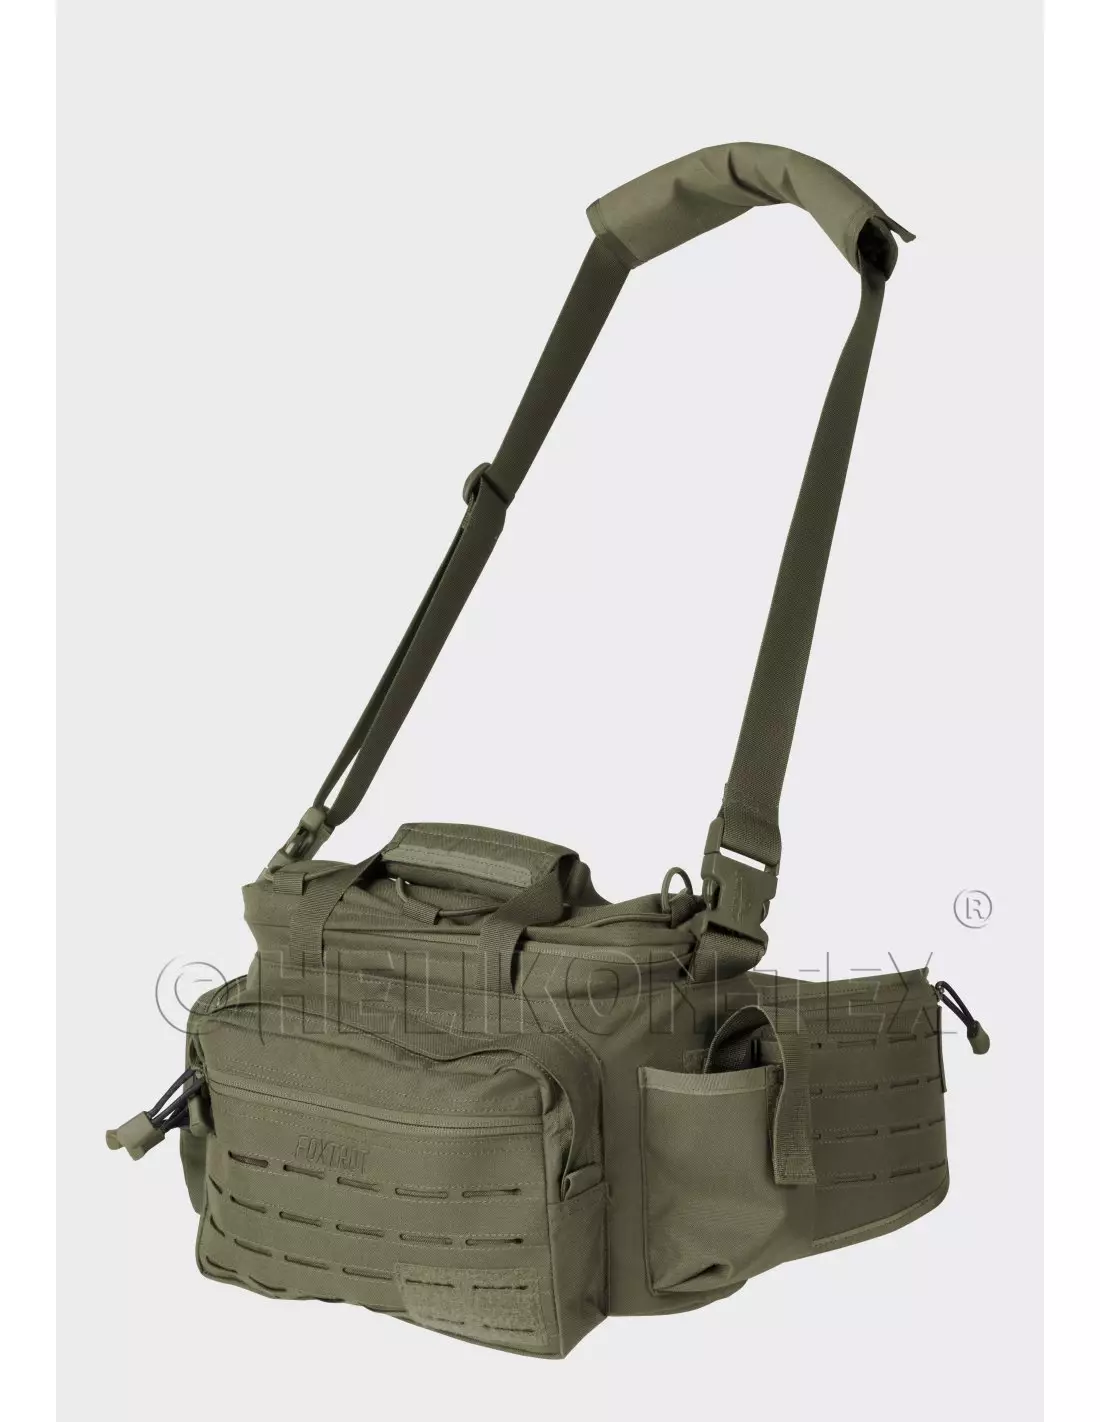 Buy 5.11 Tactical LV6 Waist Pack 2.0, Iron Grey - 56702-042. Price